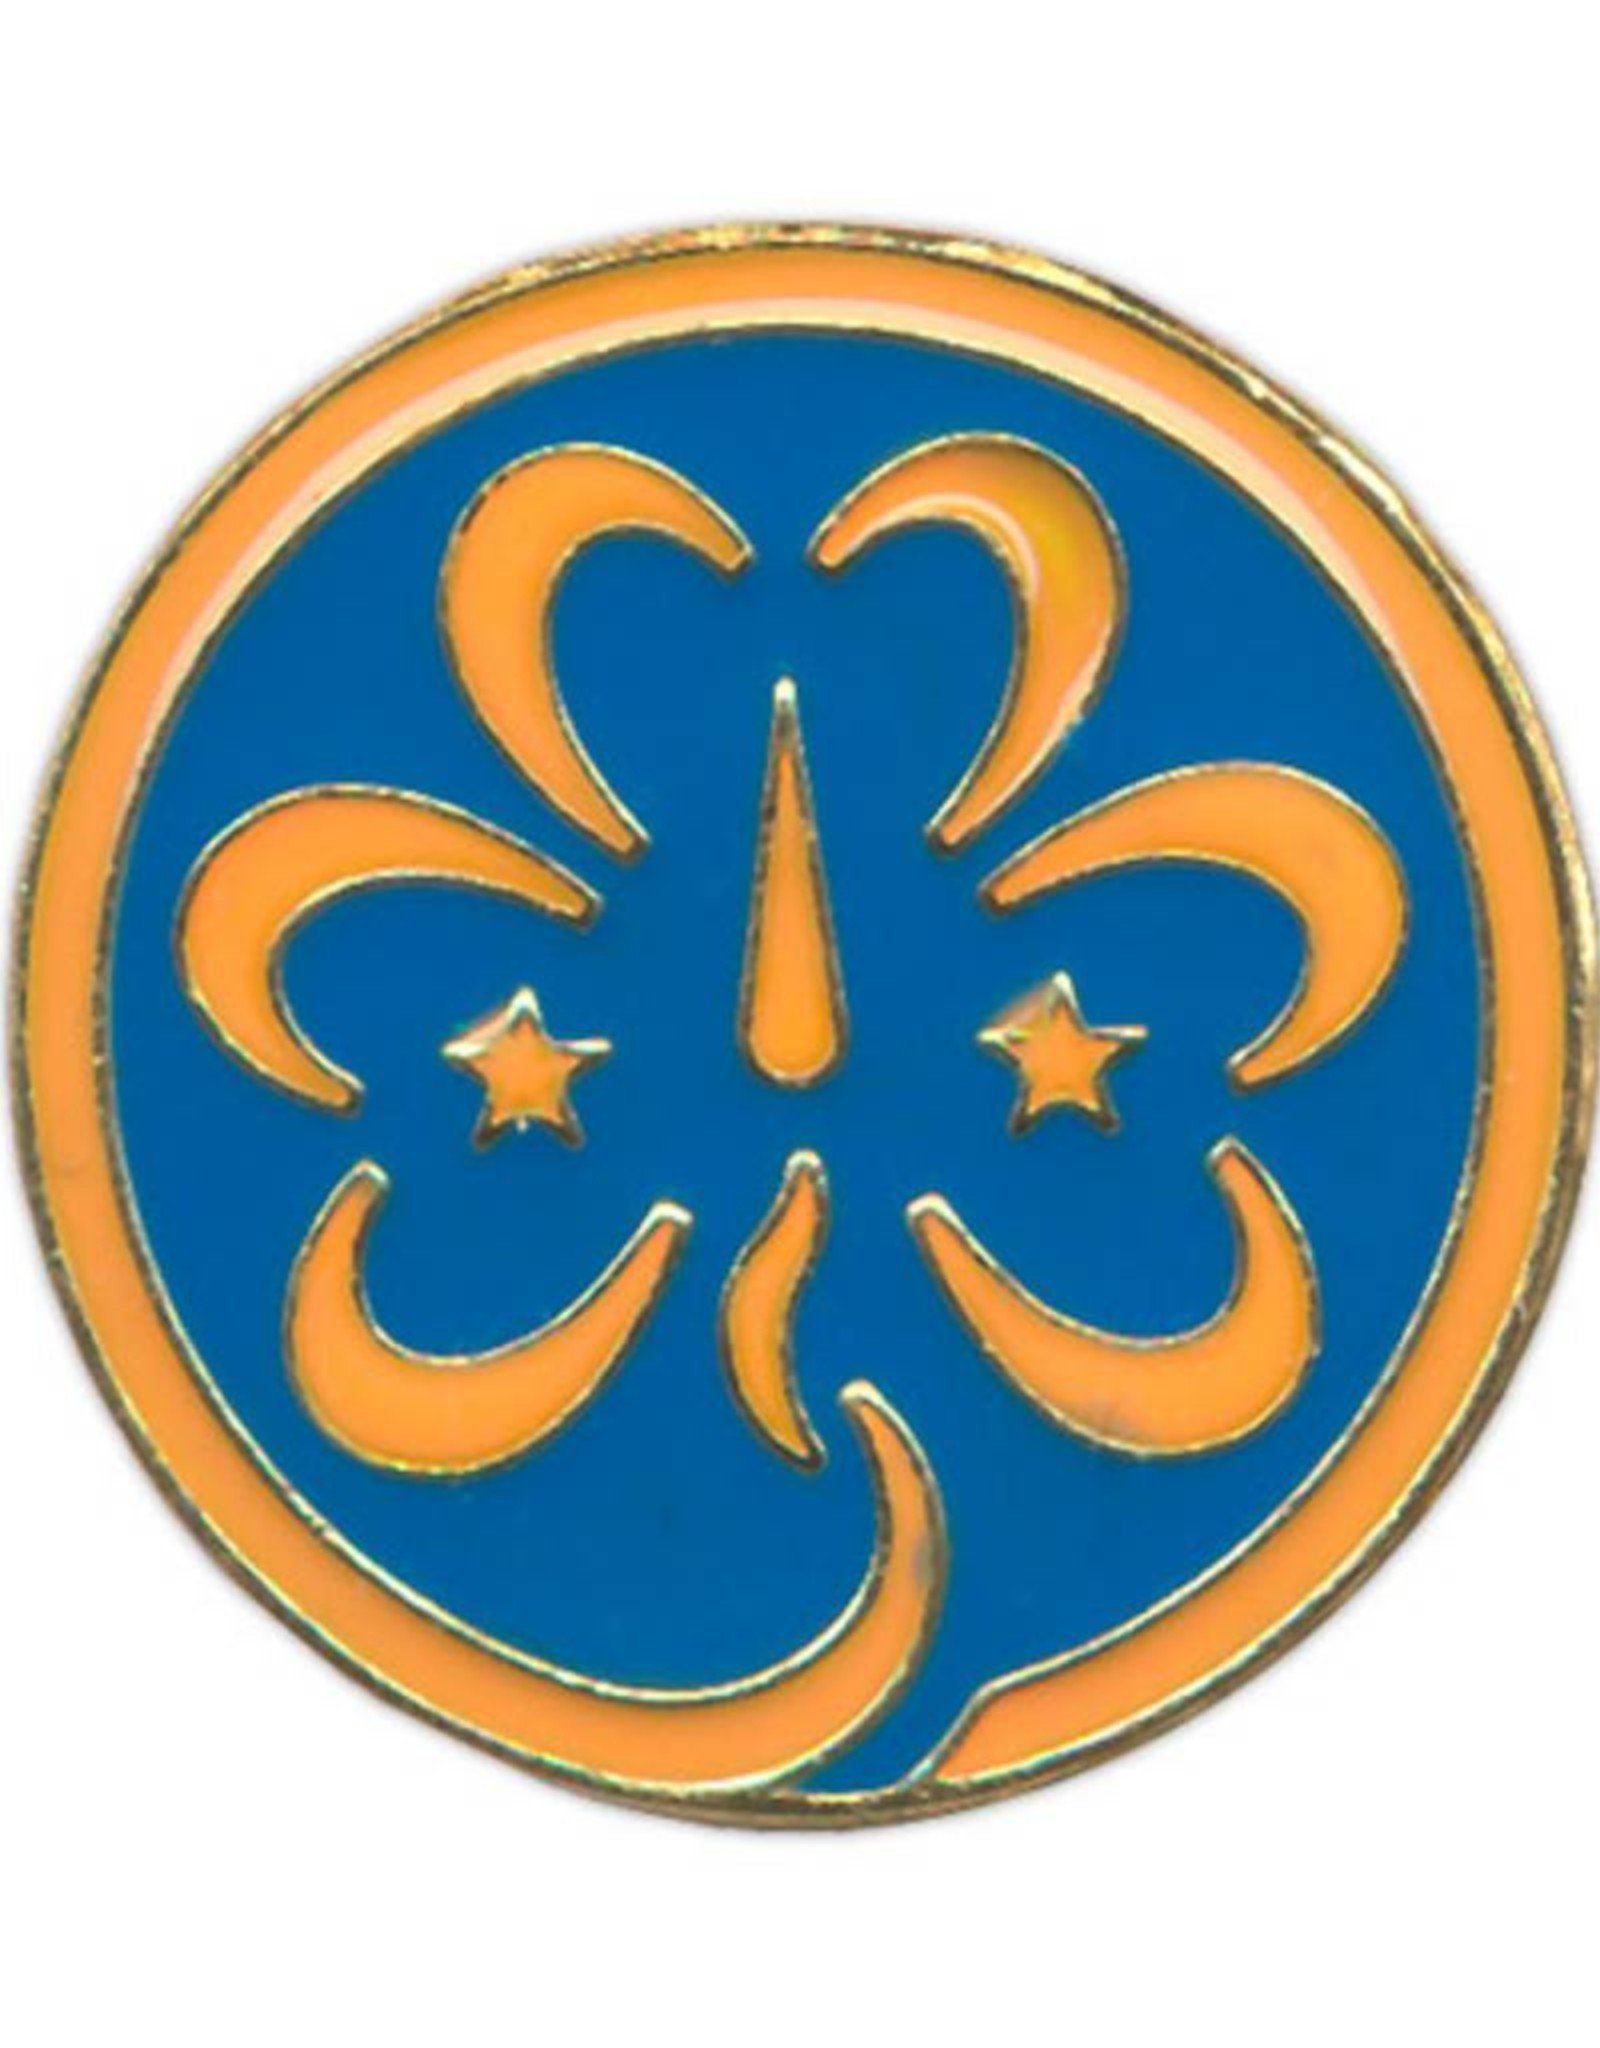 GIRL SCOUTS OF THE USA World Association Trefoil Pin WAGGGS